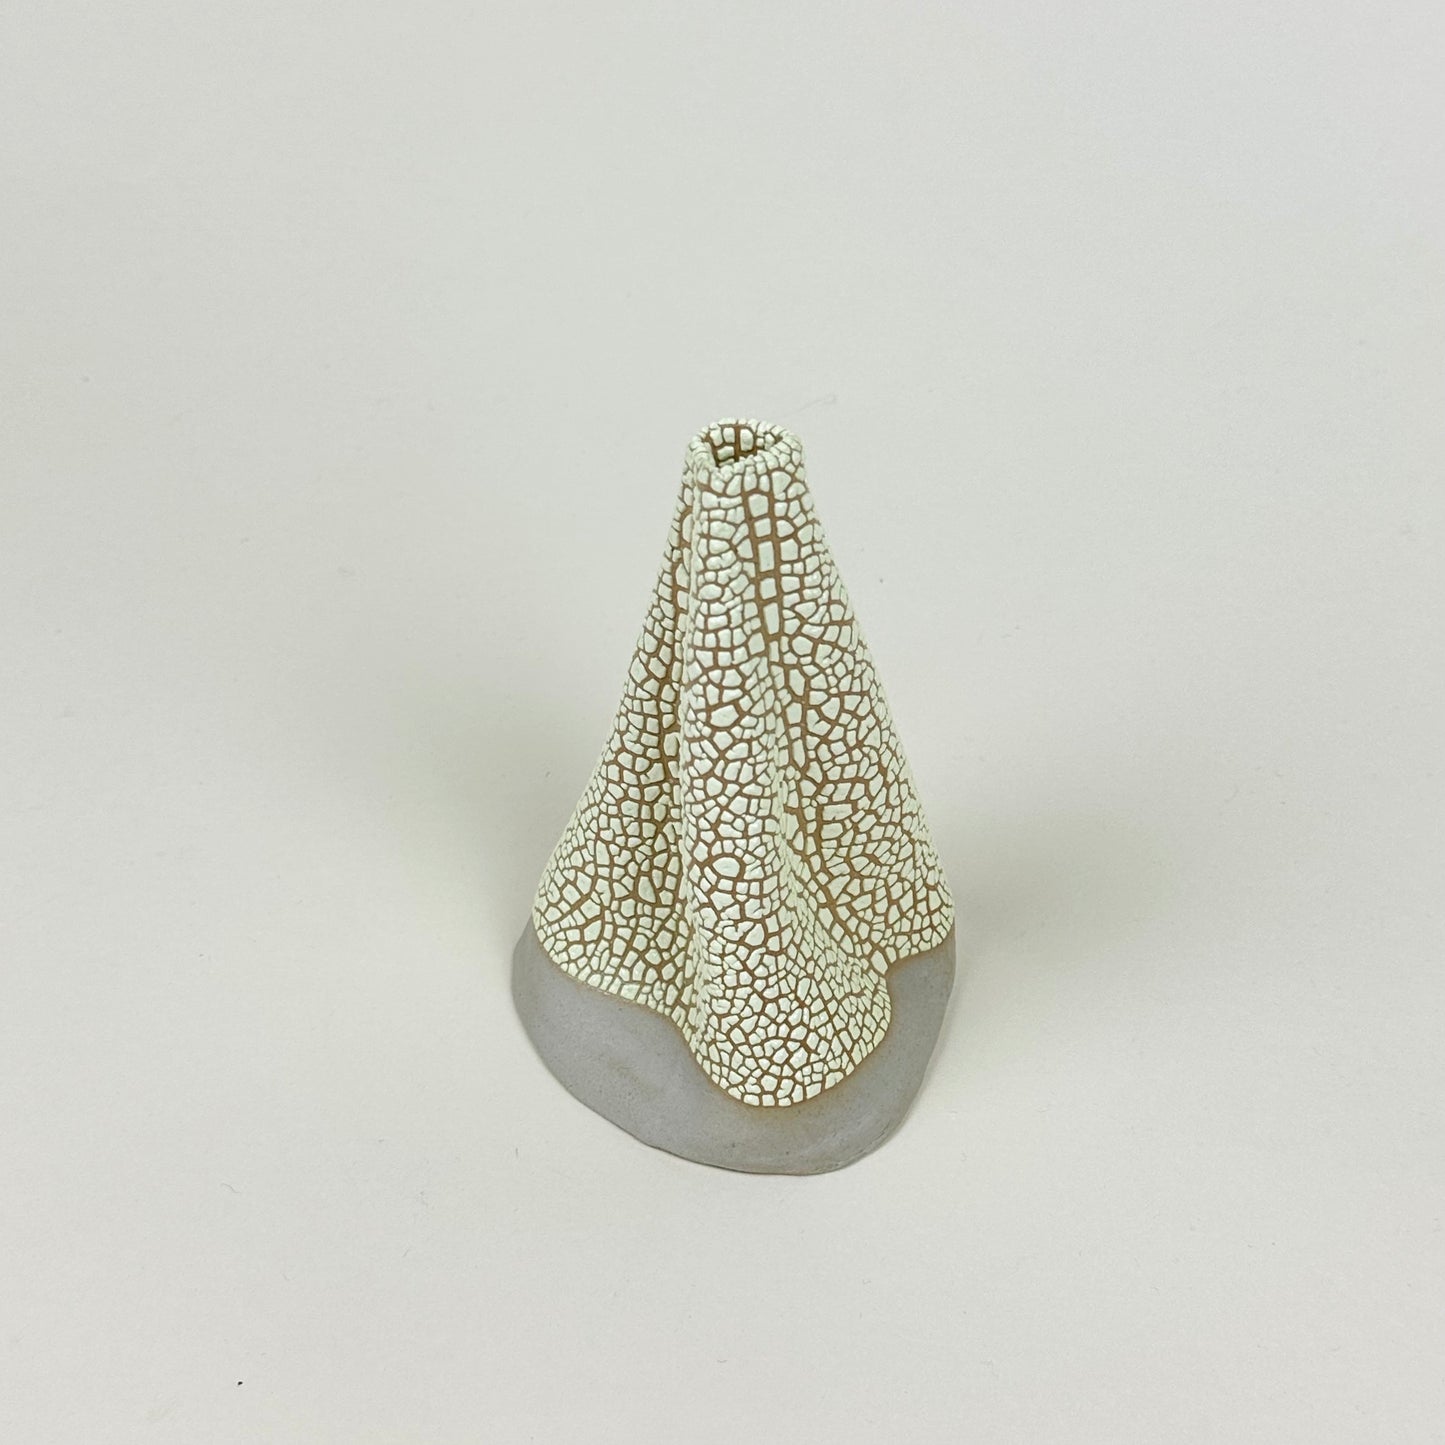 Stone and pale yellow volcano vase (L) by Astrid Öhman